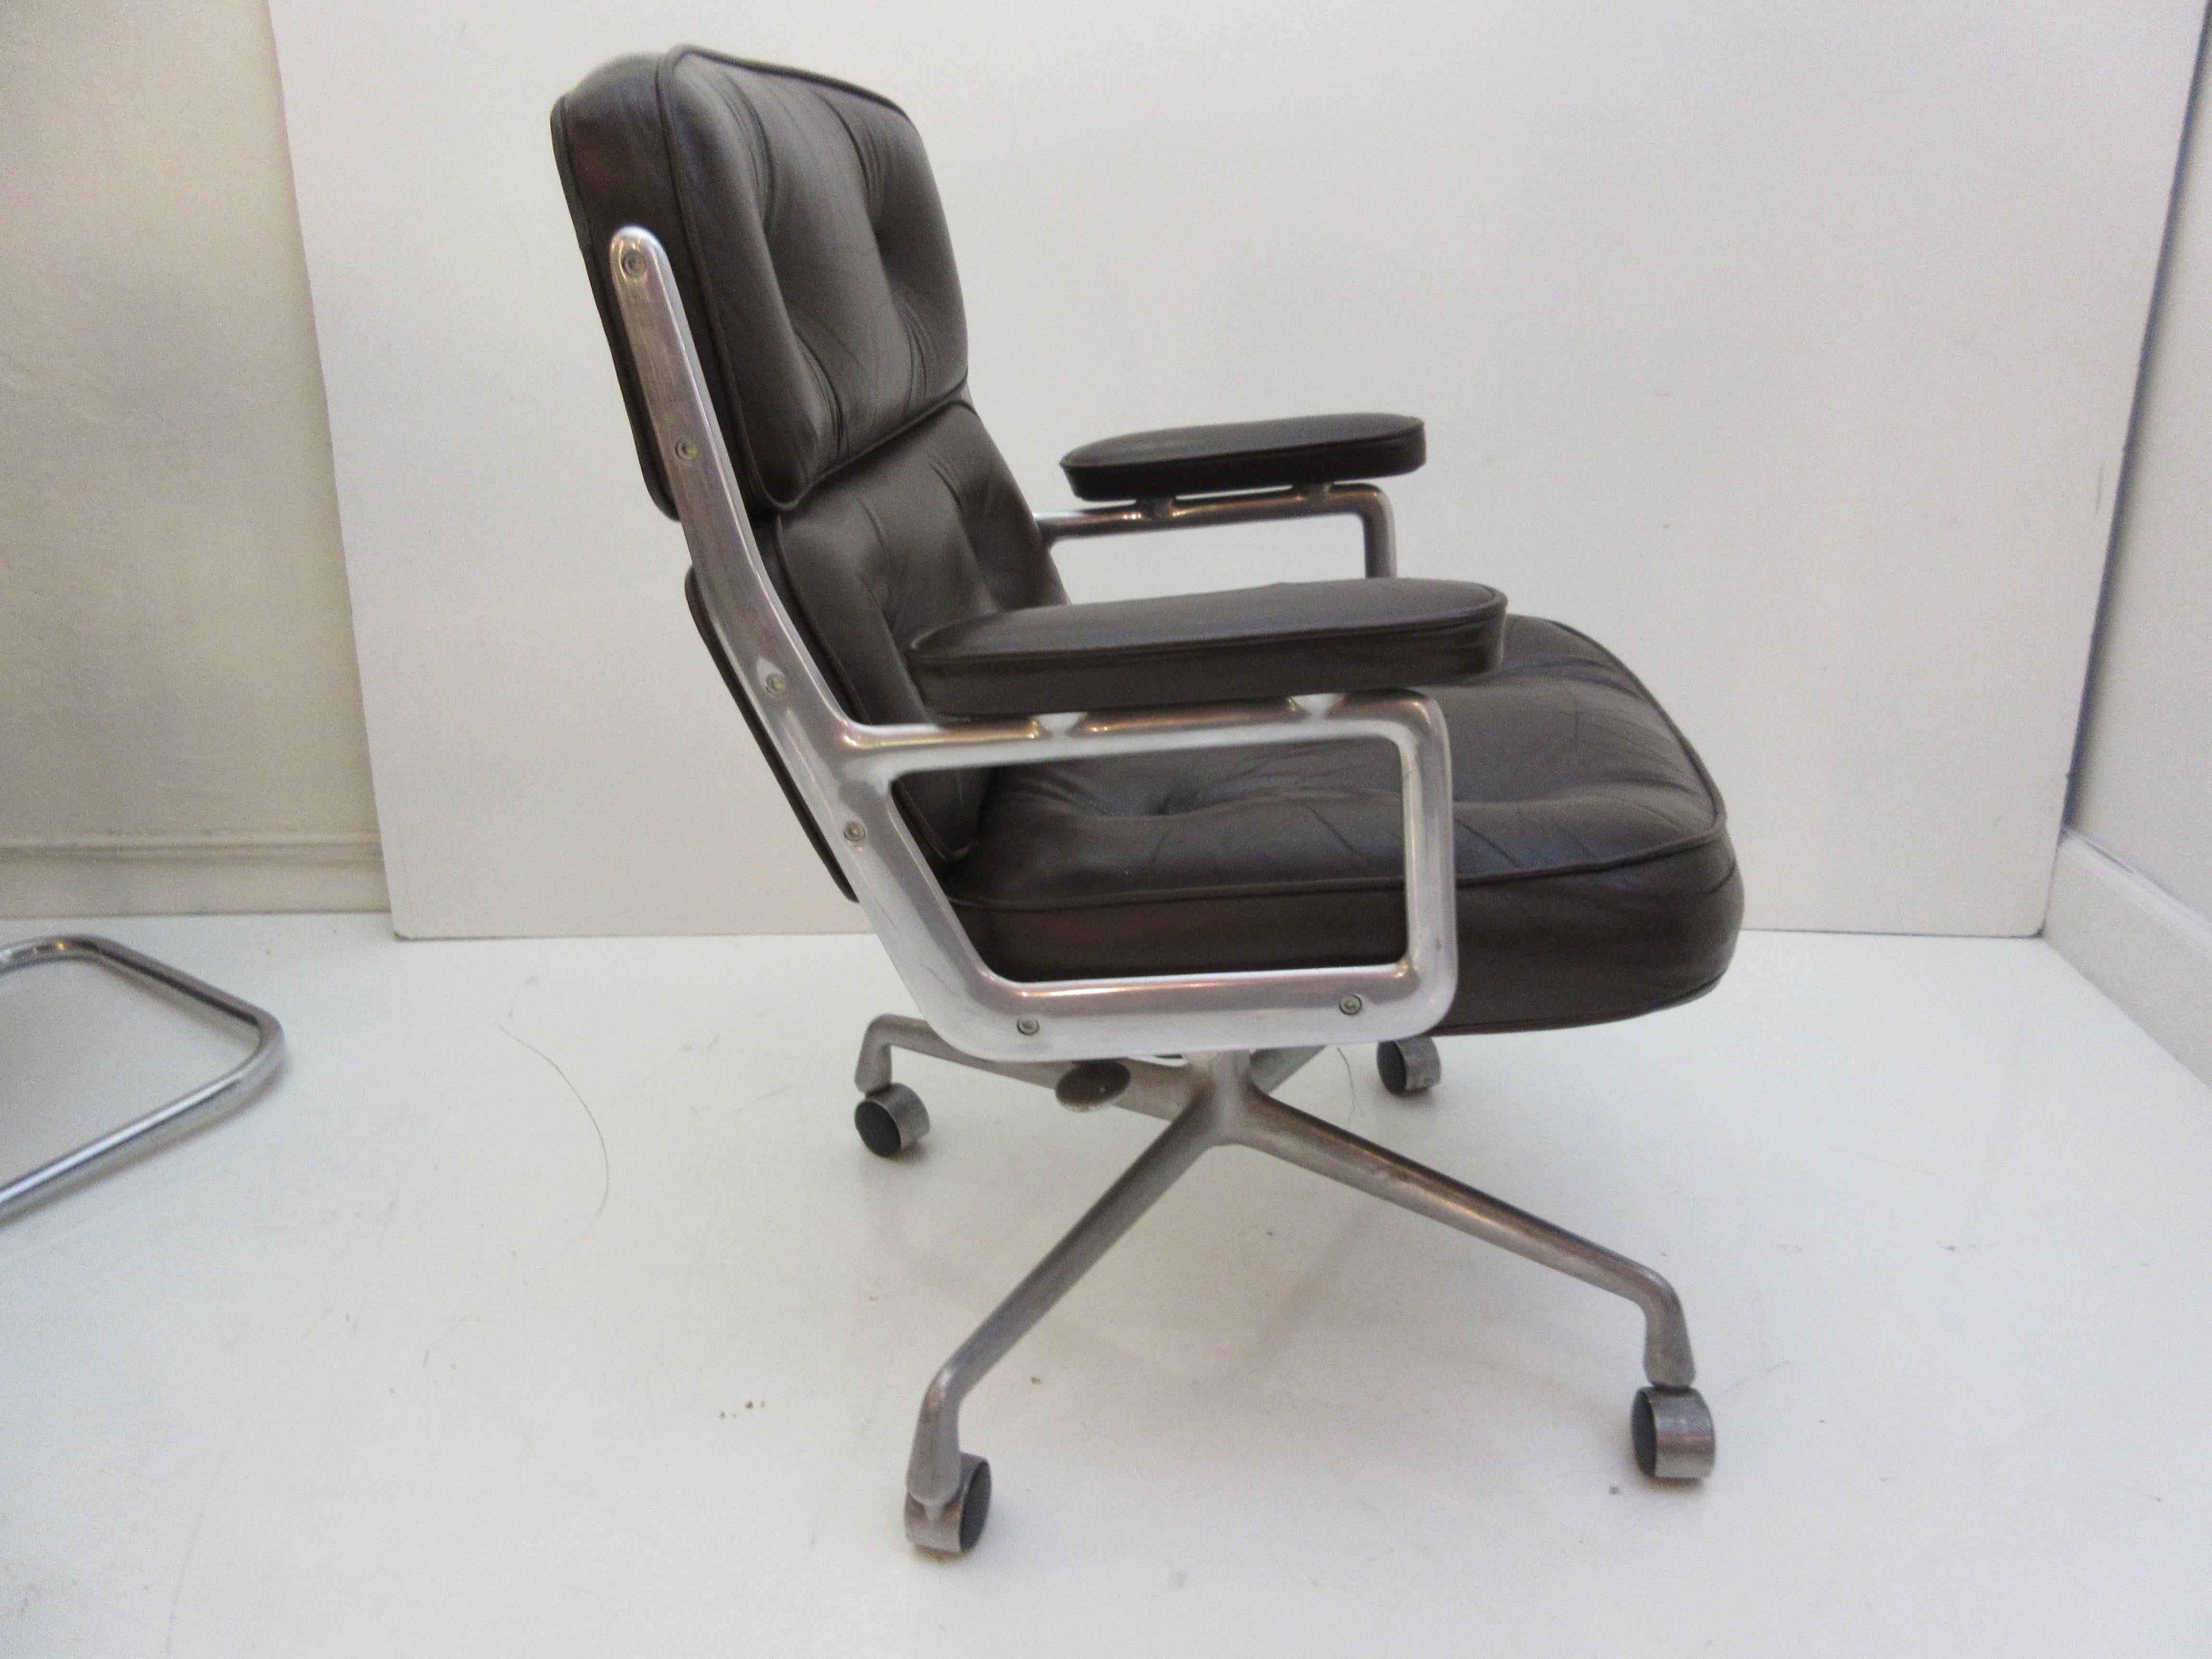 Charles and Ray Eames Time Life Chair by Herman Miller from 1969 in chocolate leather. Chair has both screw type height adjustment and tilt back mechanism. Leather is in remarkably good original condition with no stains or holes. One arm has a slit